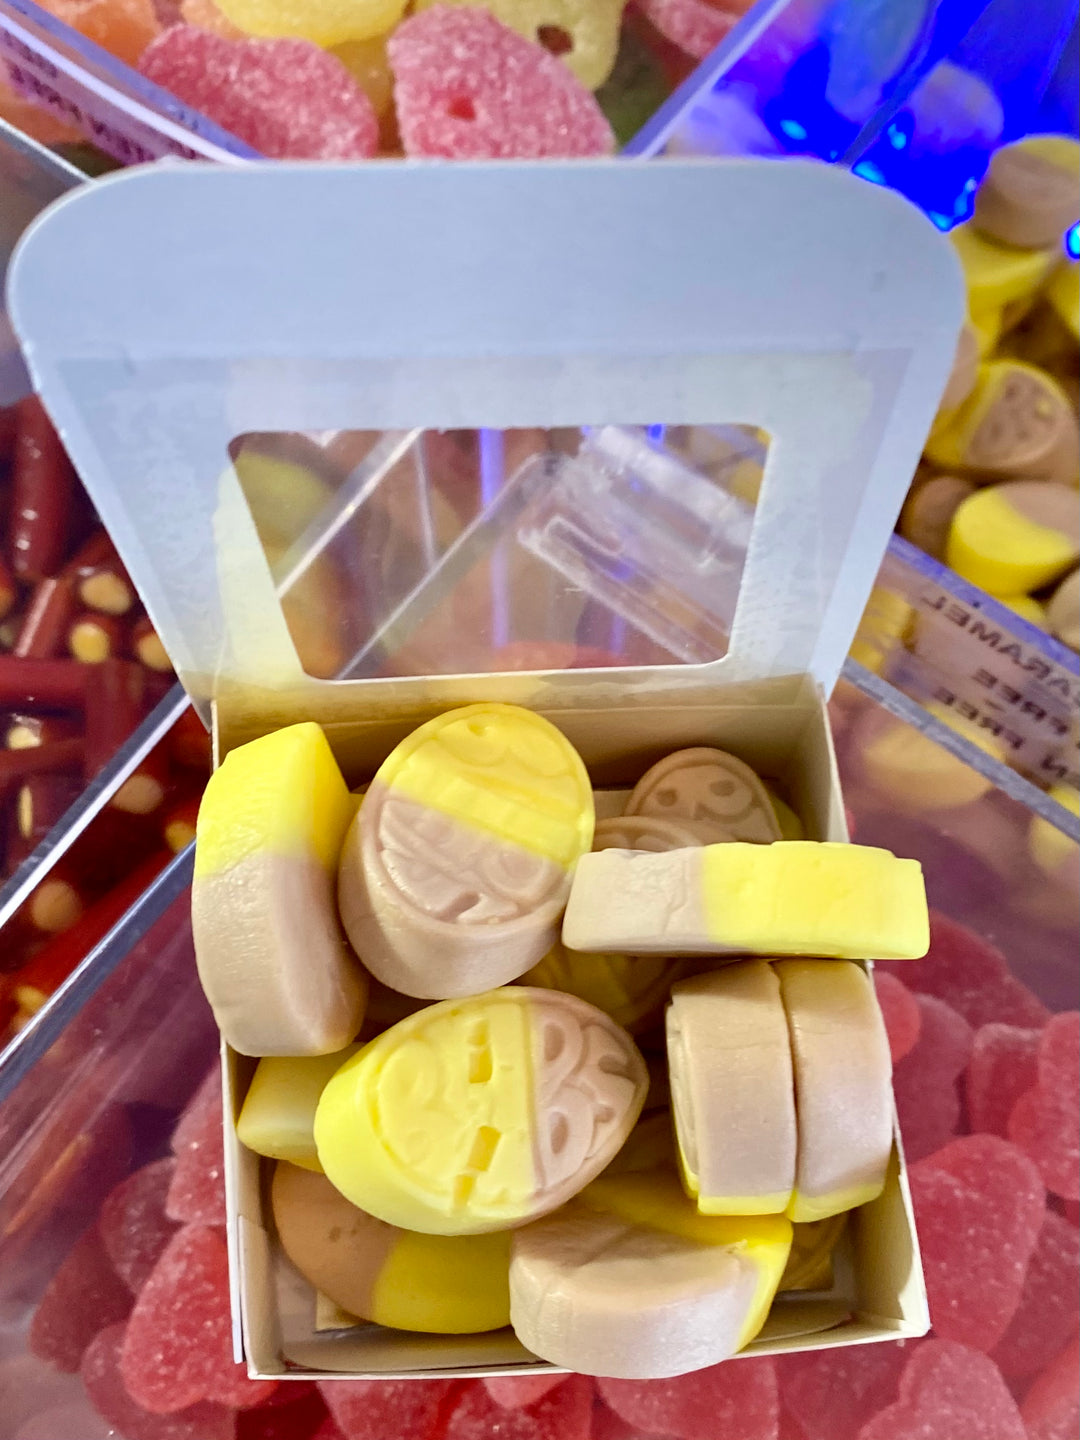 "Sweets By Swedes” Corporate gift-packaging, seasonal theme & flavors